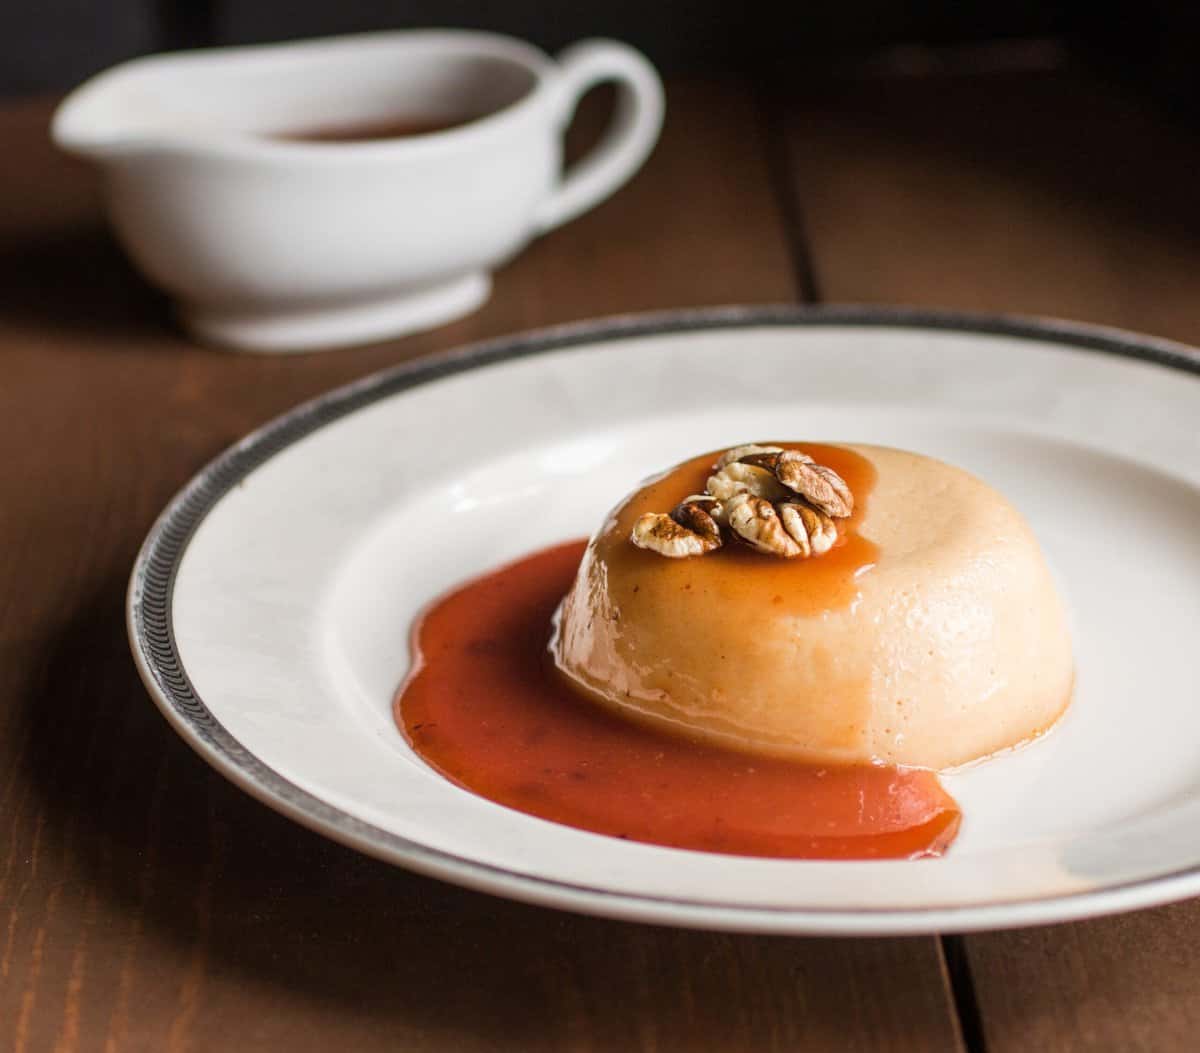 Paw Paw Panna Cotta with Wild Plum Sauce on a plate 